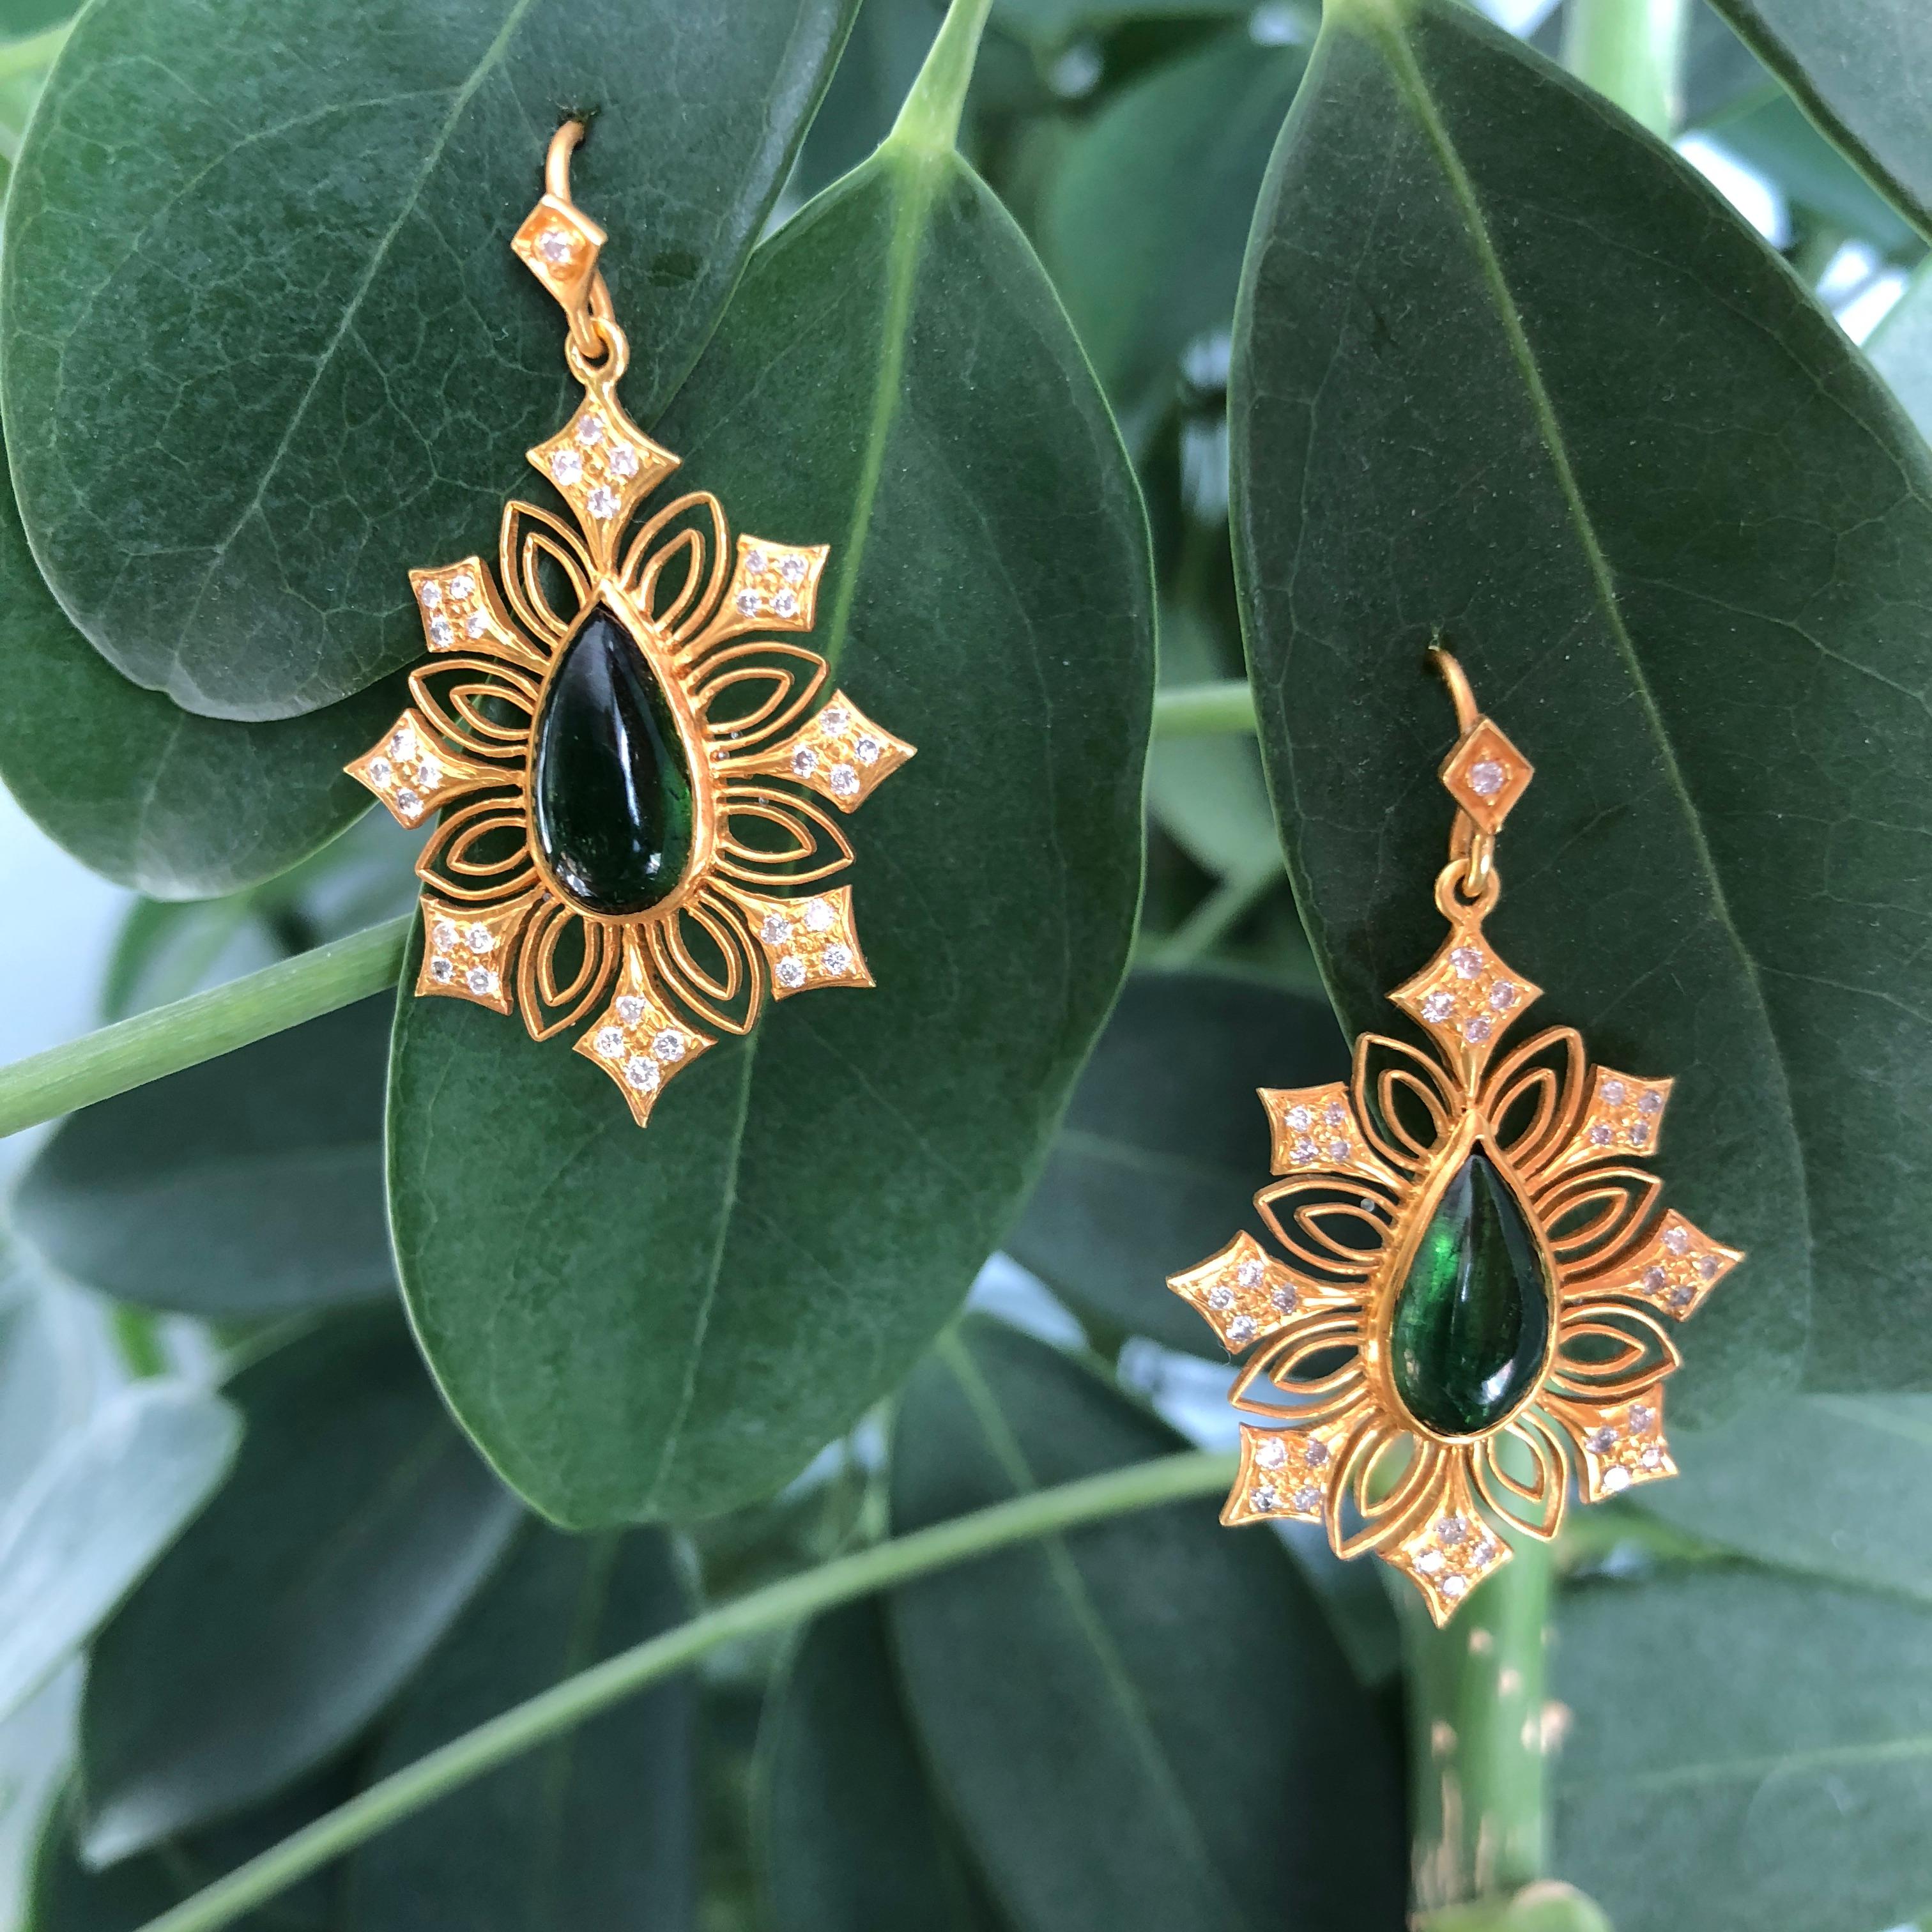 Lauren Harper Green Tourmaline, Diamond and 18kt Gold Earrings. Designed to resemble the details in a royal crown, delicate 18kt gold and diamonds surround deep green tourmaline pear cabochons.  Lightweight and delicate, and finished in Lauren